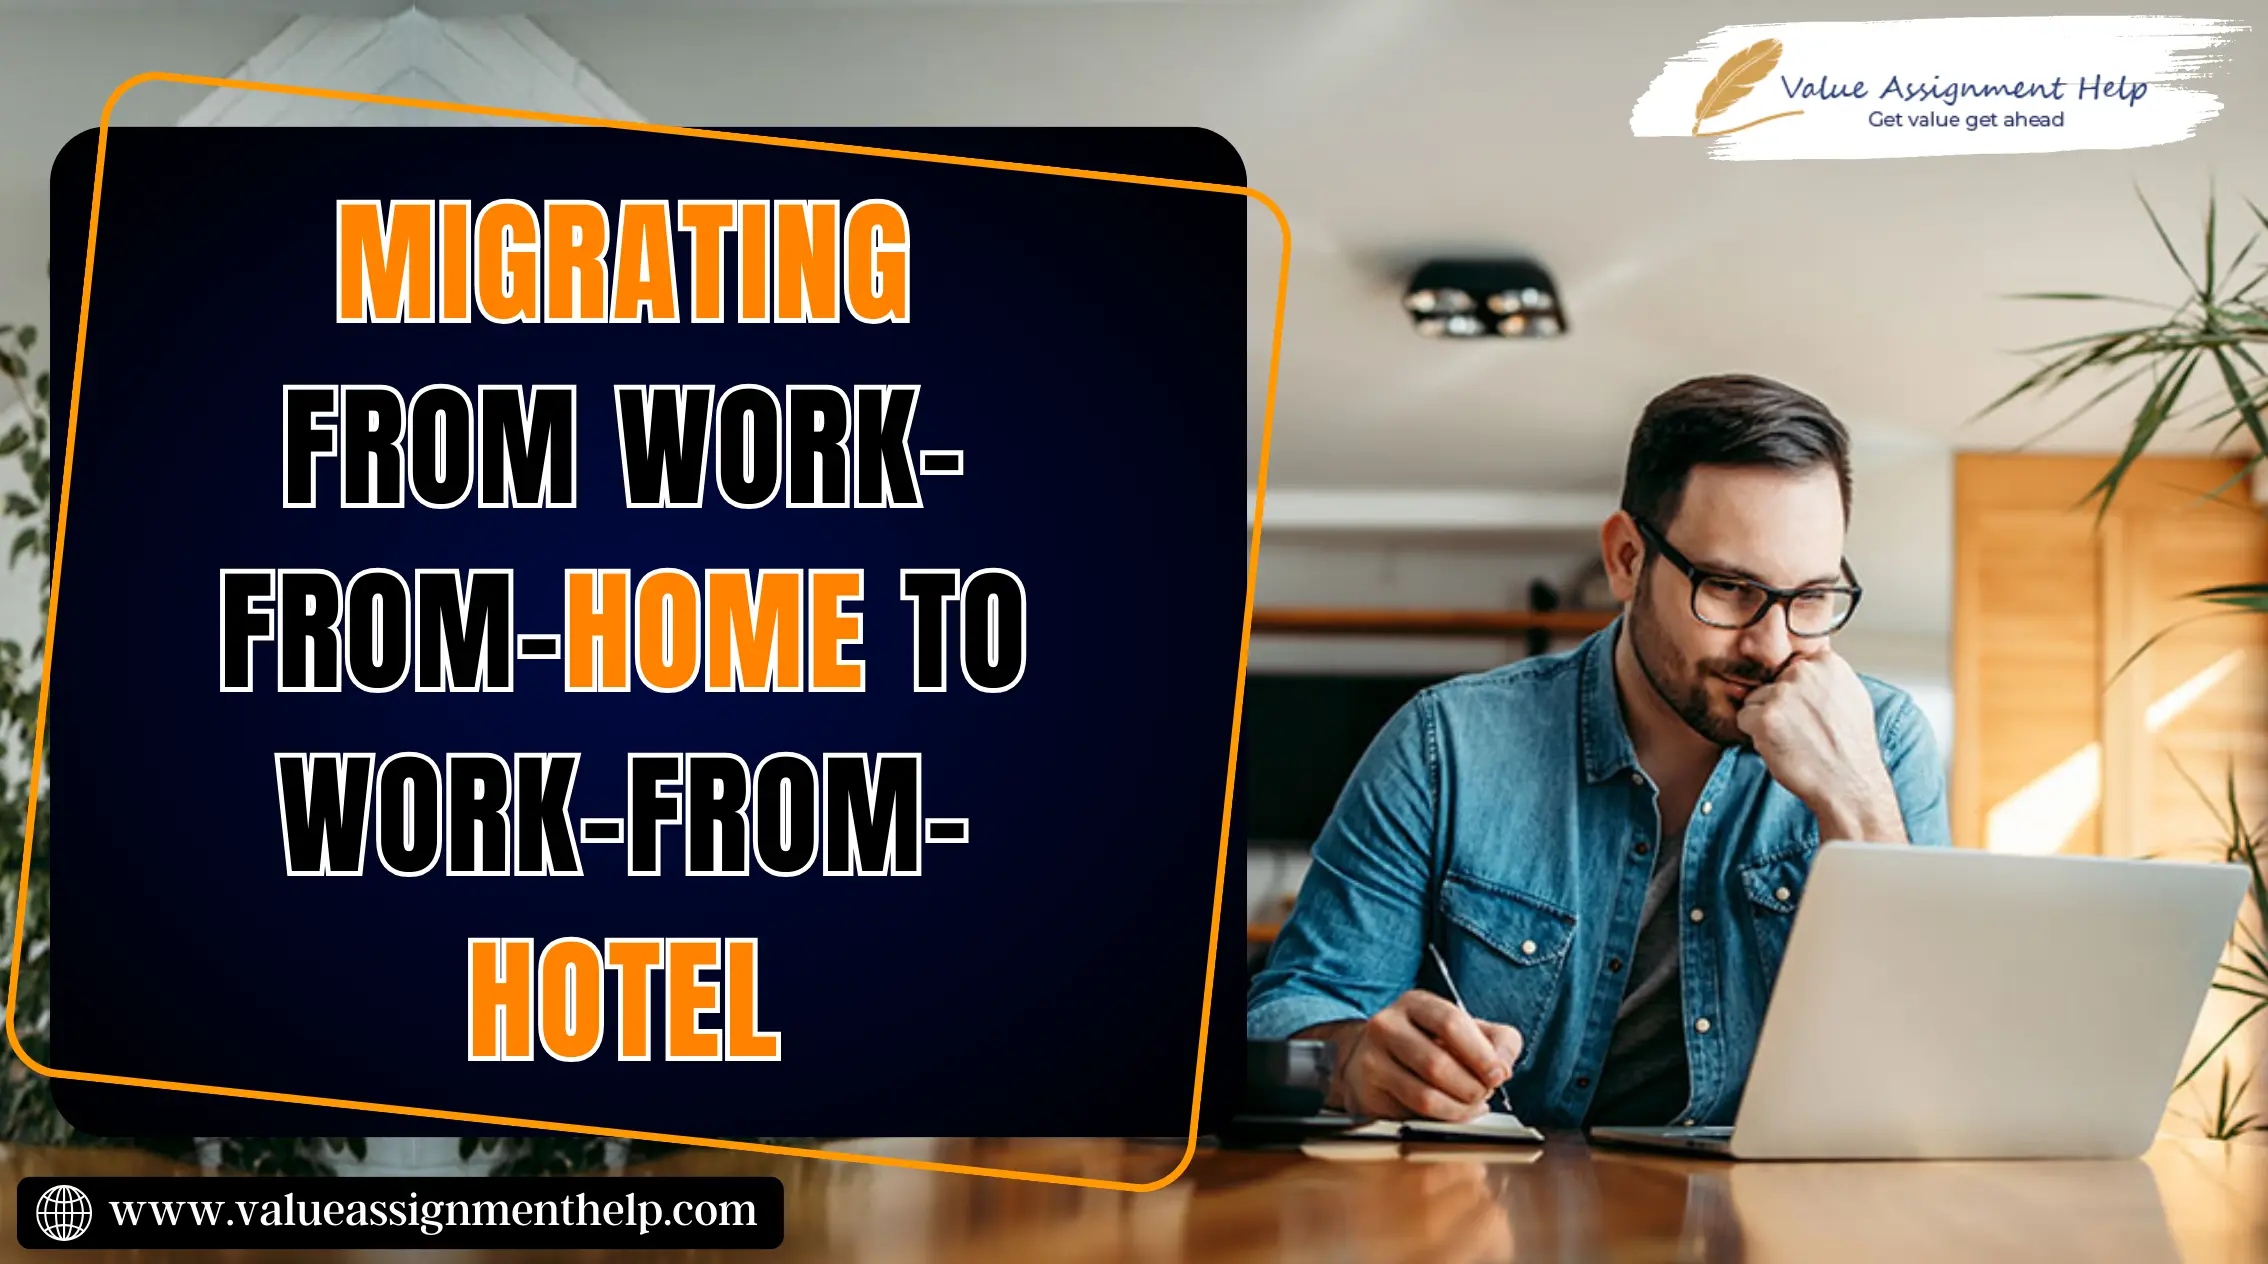  Migrating from Work-from-home to work-from-hotel